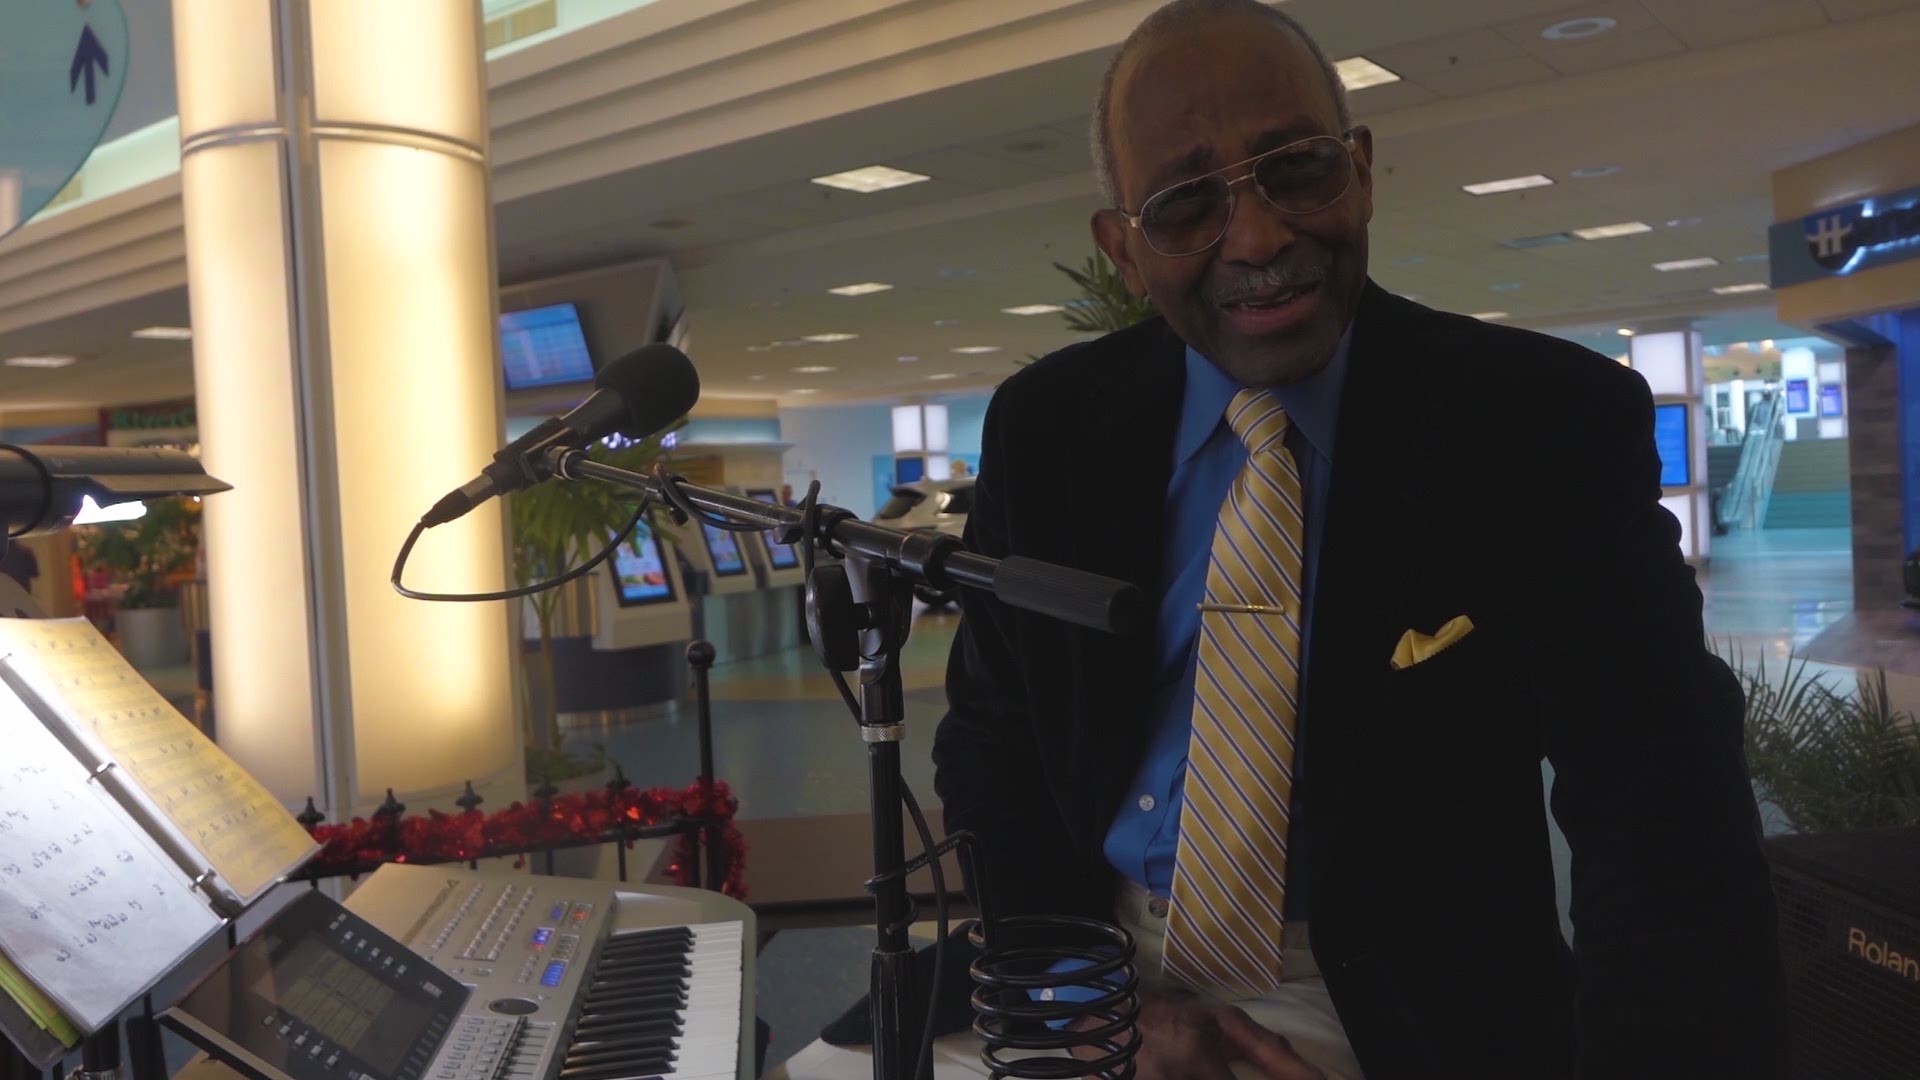 Keyboardist Roger Glover has been playing music at the Jacksonville International Airport for over 10 years. First Coast YOU introduces you to the man behind the keys as he shares his musical journey.